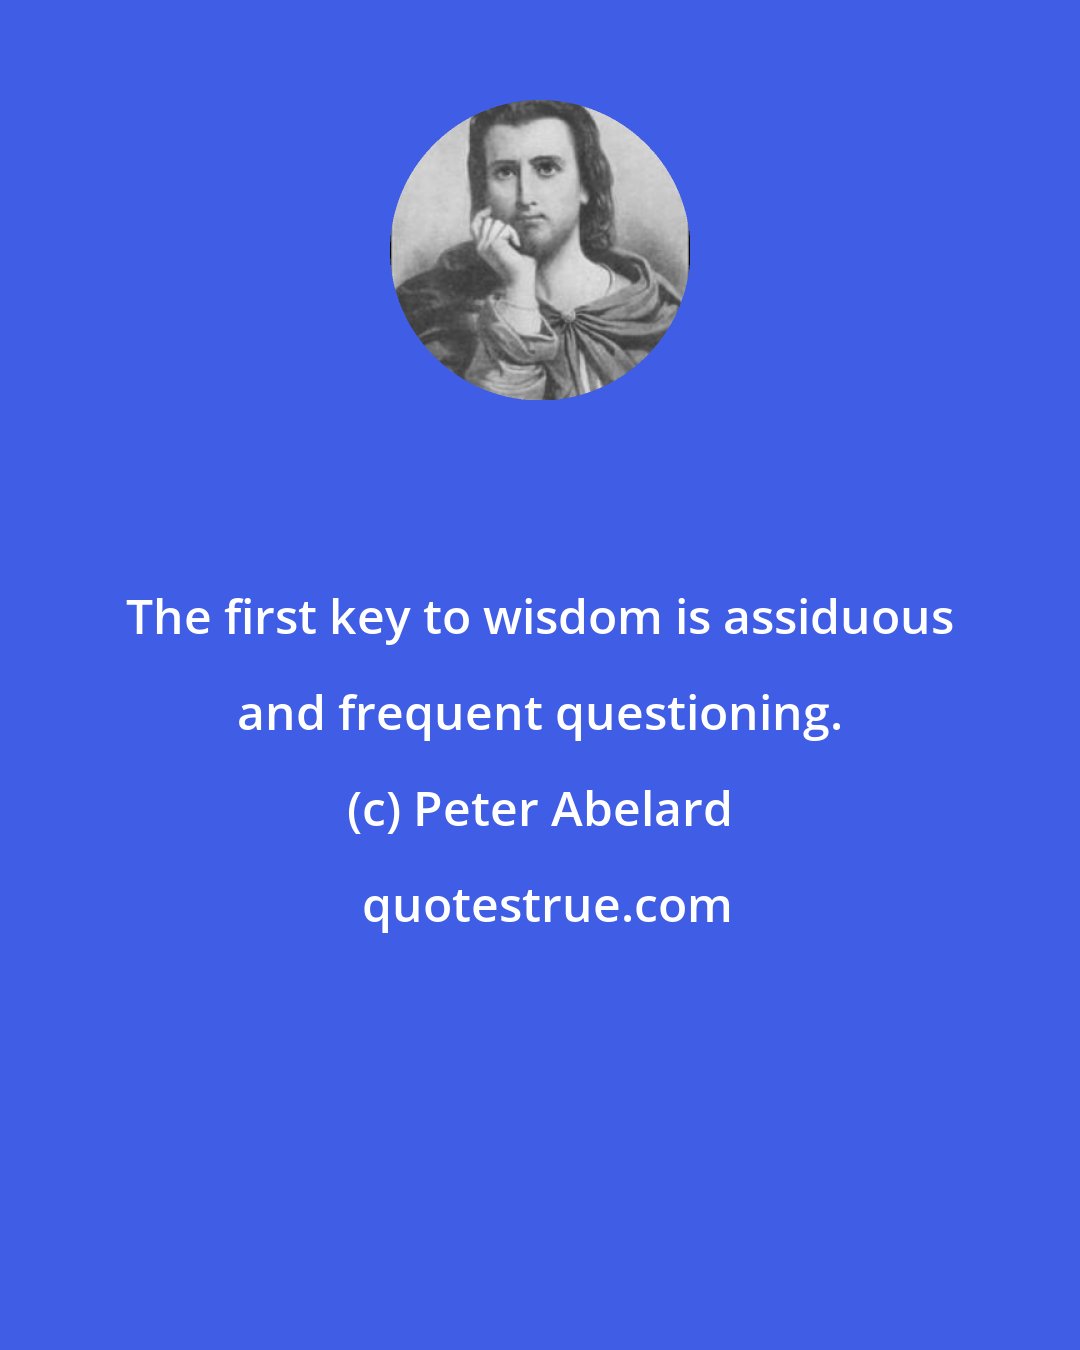 Peter Abelard: The first key to wisdom is assiduous and frequent questioning.